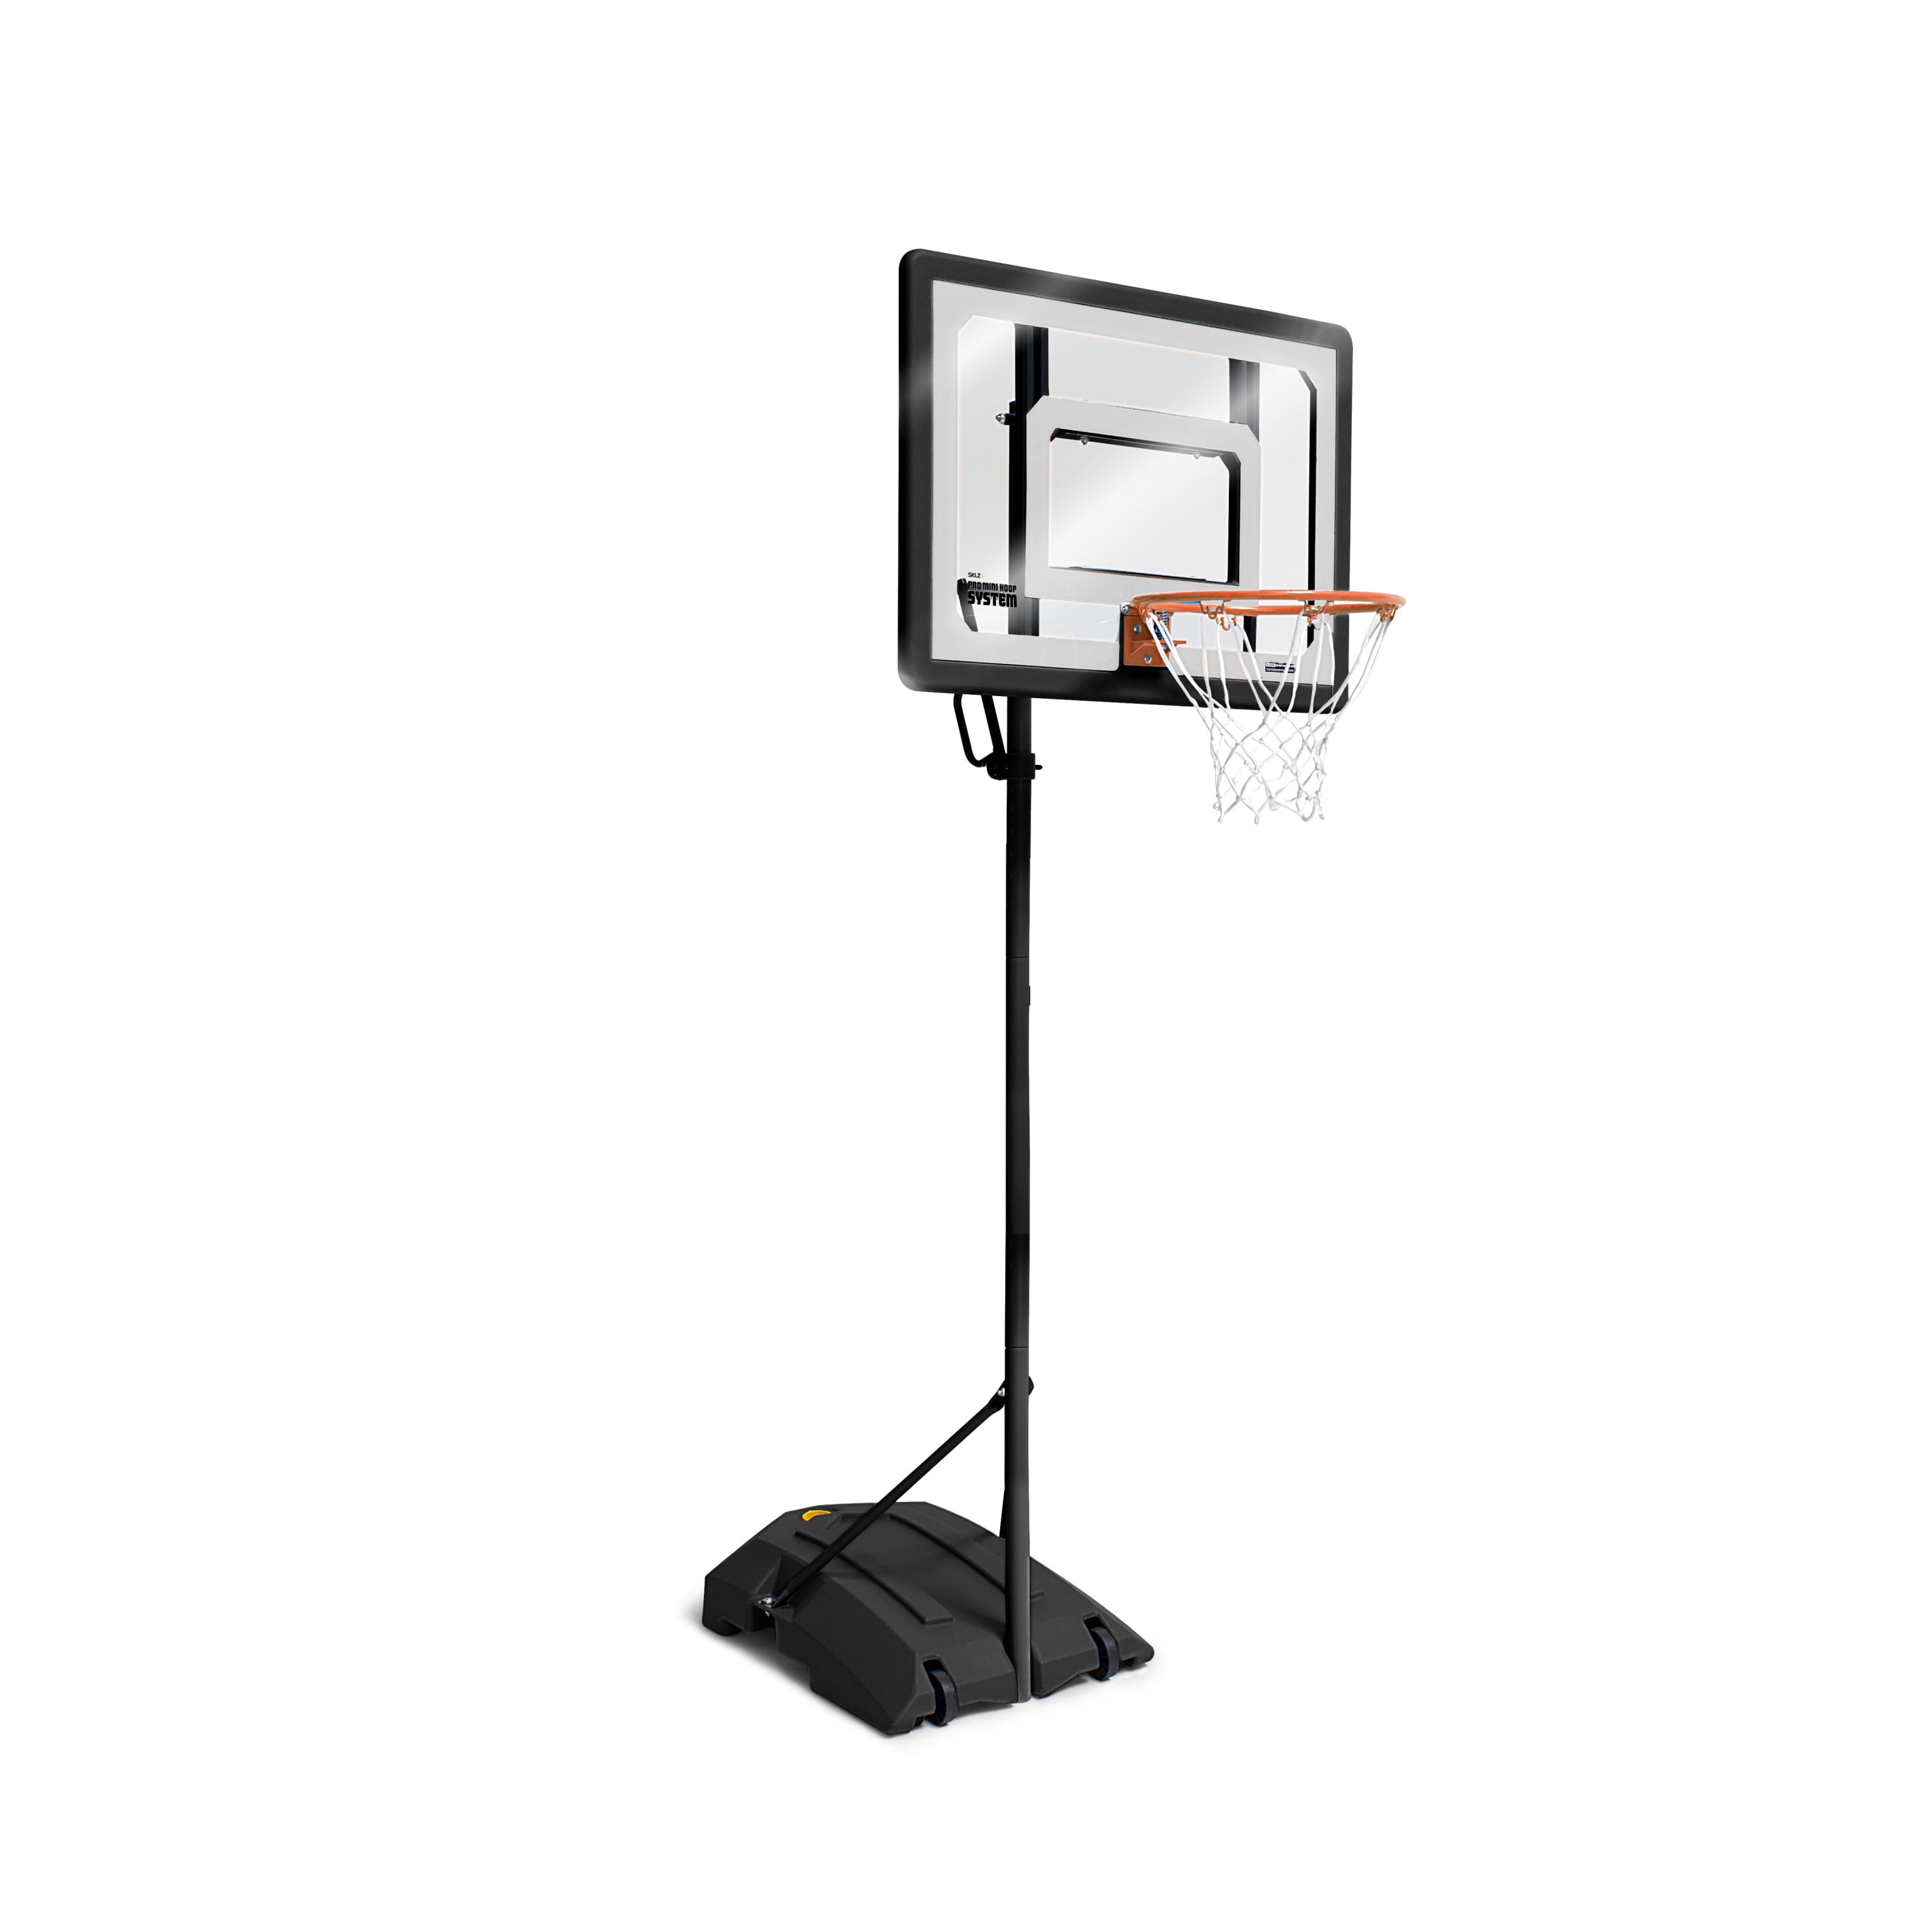 Durable Rugged Indoor Outdoor Sports for Adults&Kids Basketball Net Hanging Basketball Wall Mounted Basketball Rim Goal Net 